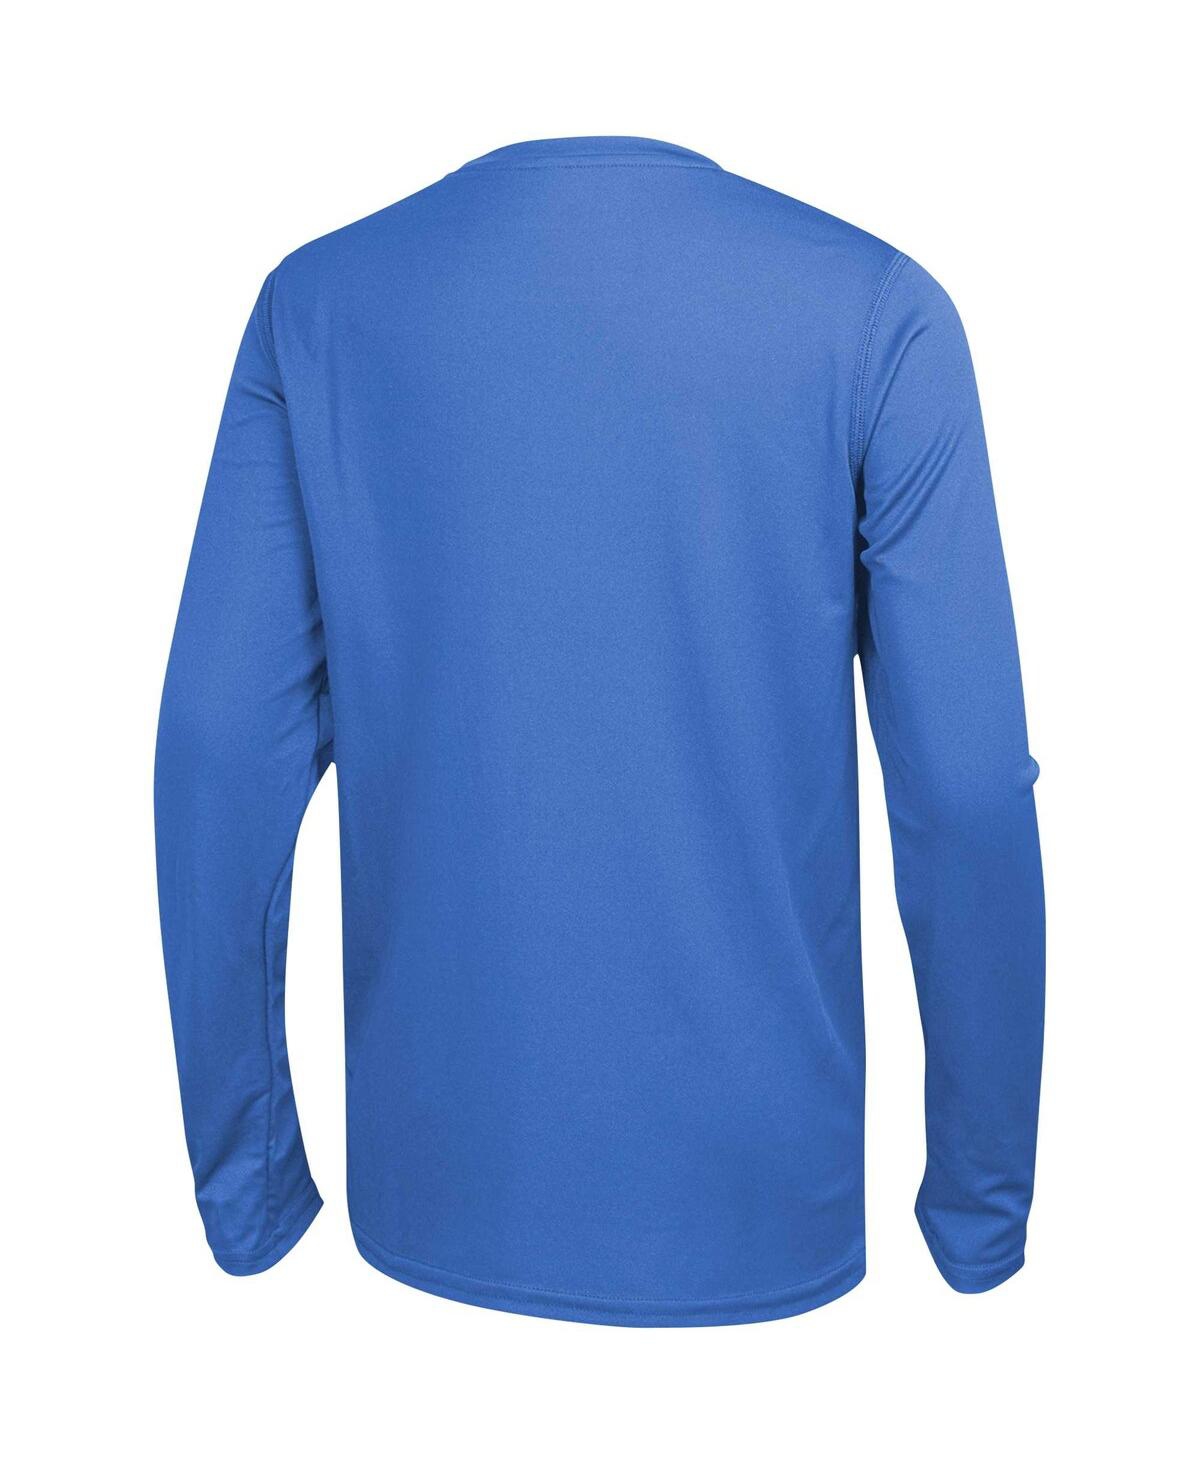 Shop Outerstuff Men's Powder Blue Los Angeles Chargers Side Drill Long Sleeve T-shirt